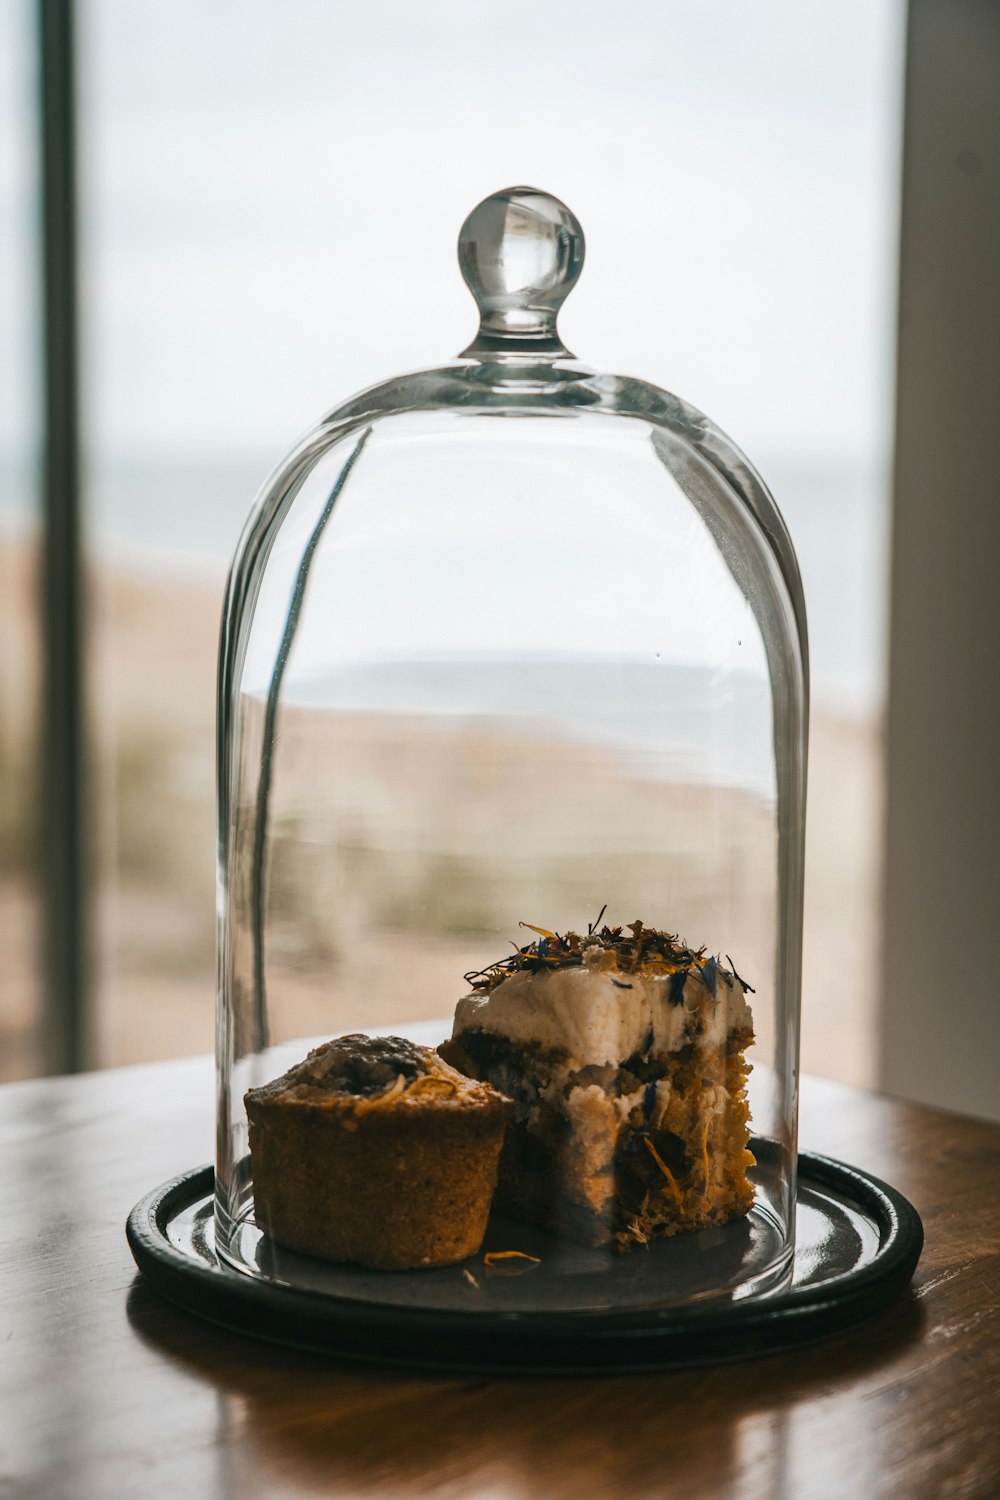 a cake under a glass dome on a wooden table